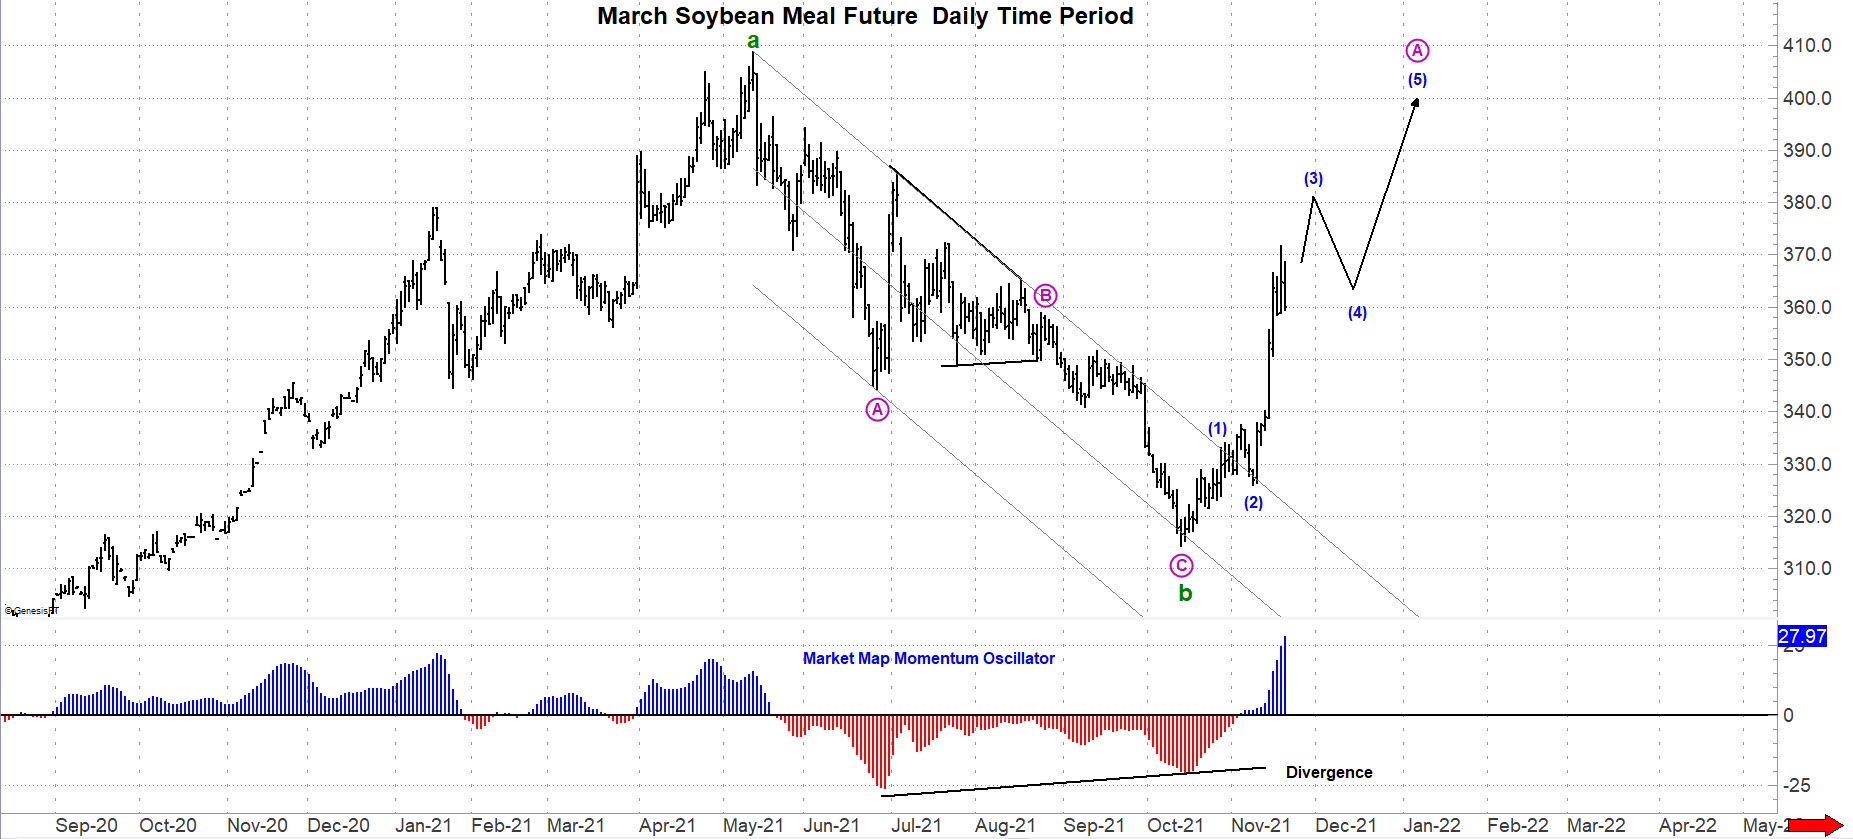 Soybean Meal Futures Continuous